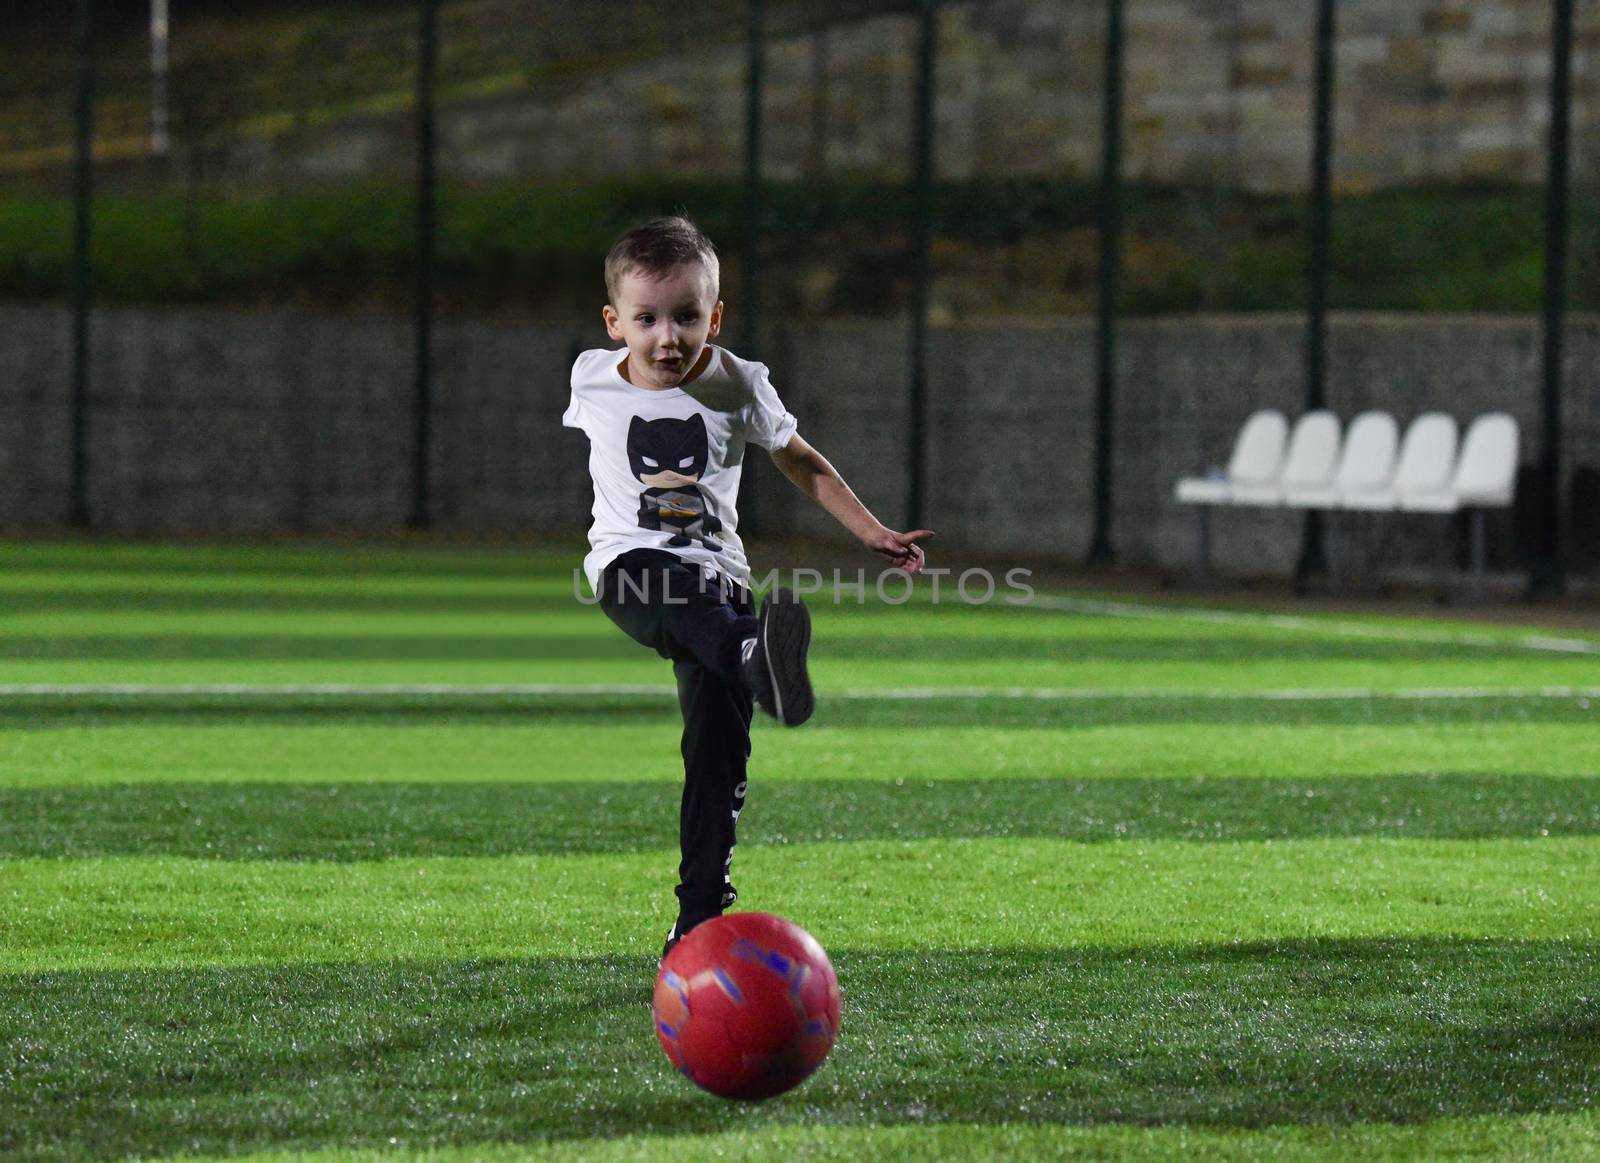 happy child kicks a red ball on the football field, night time